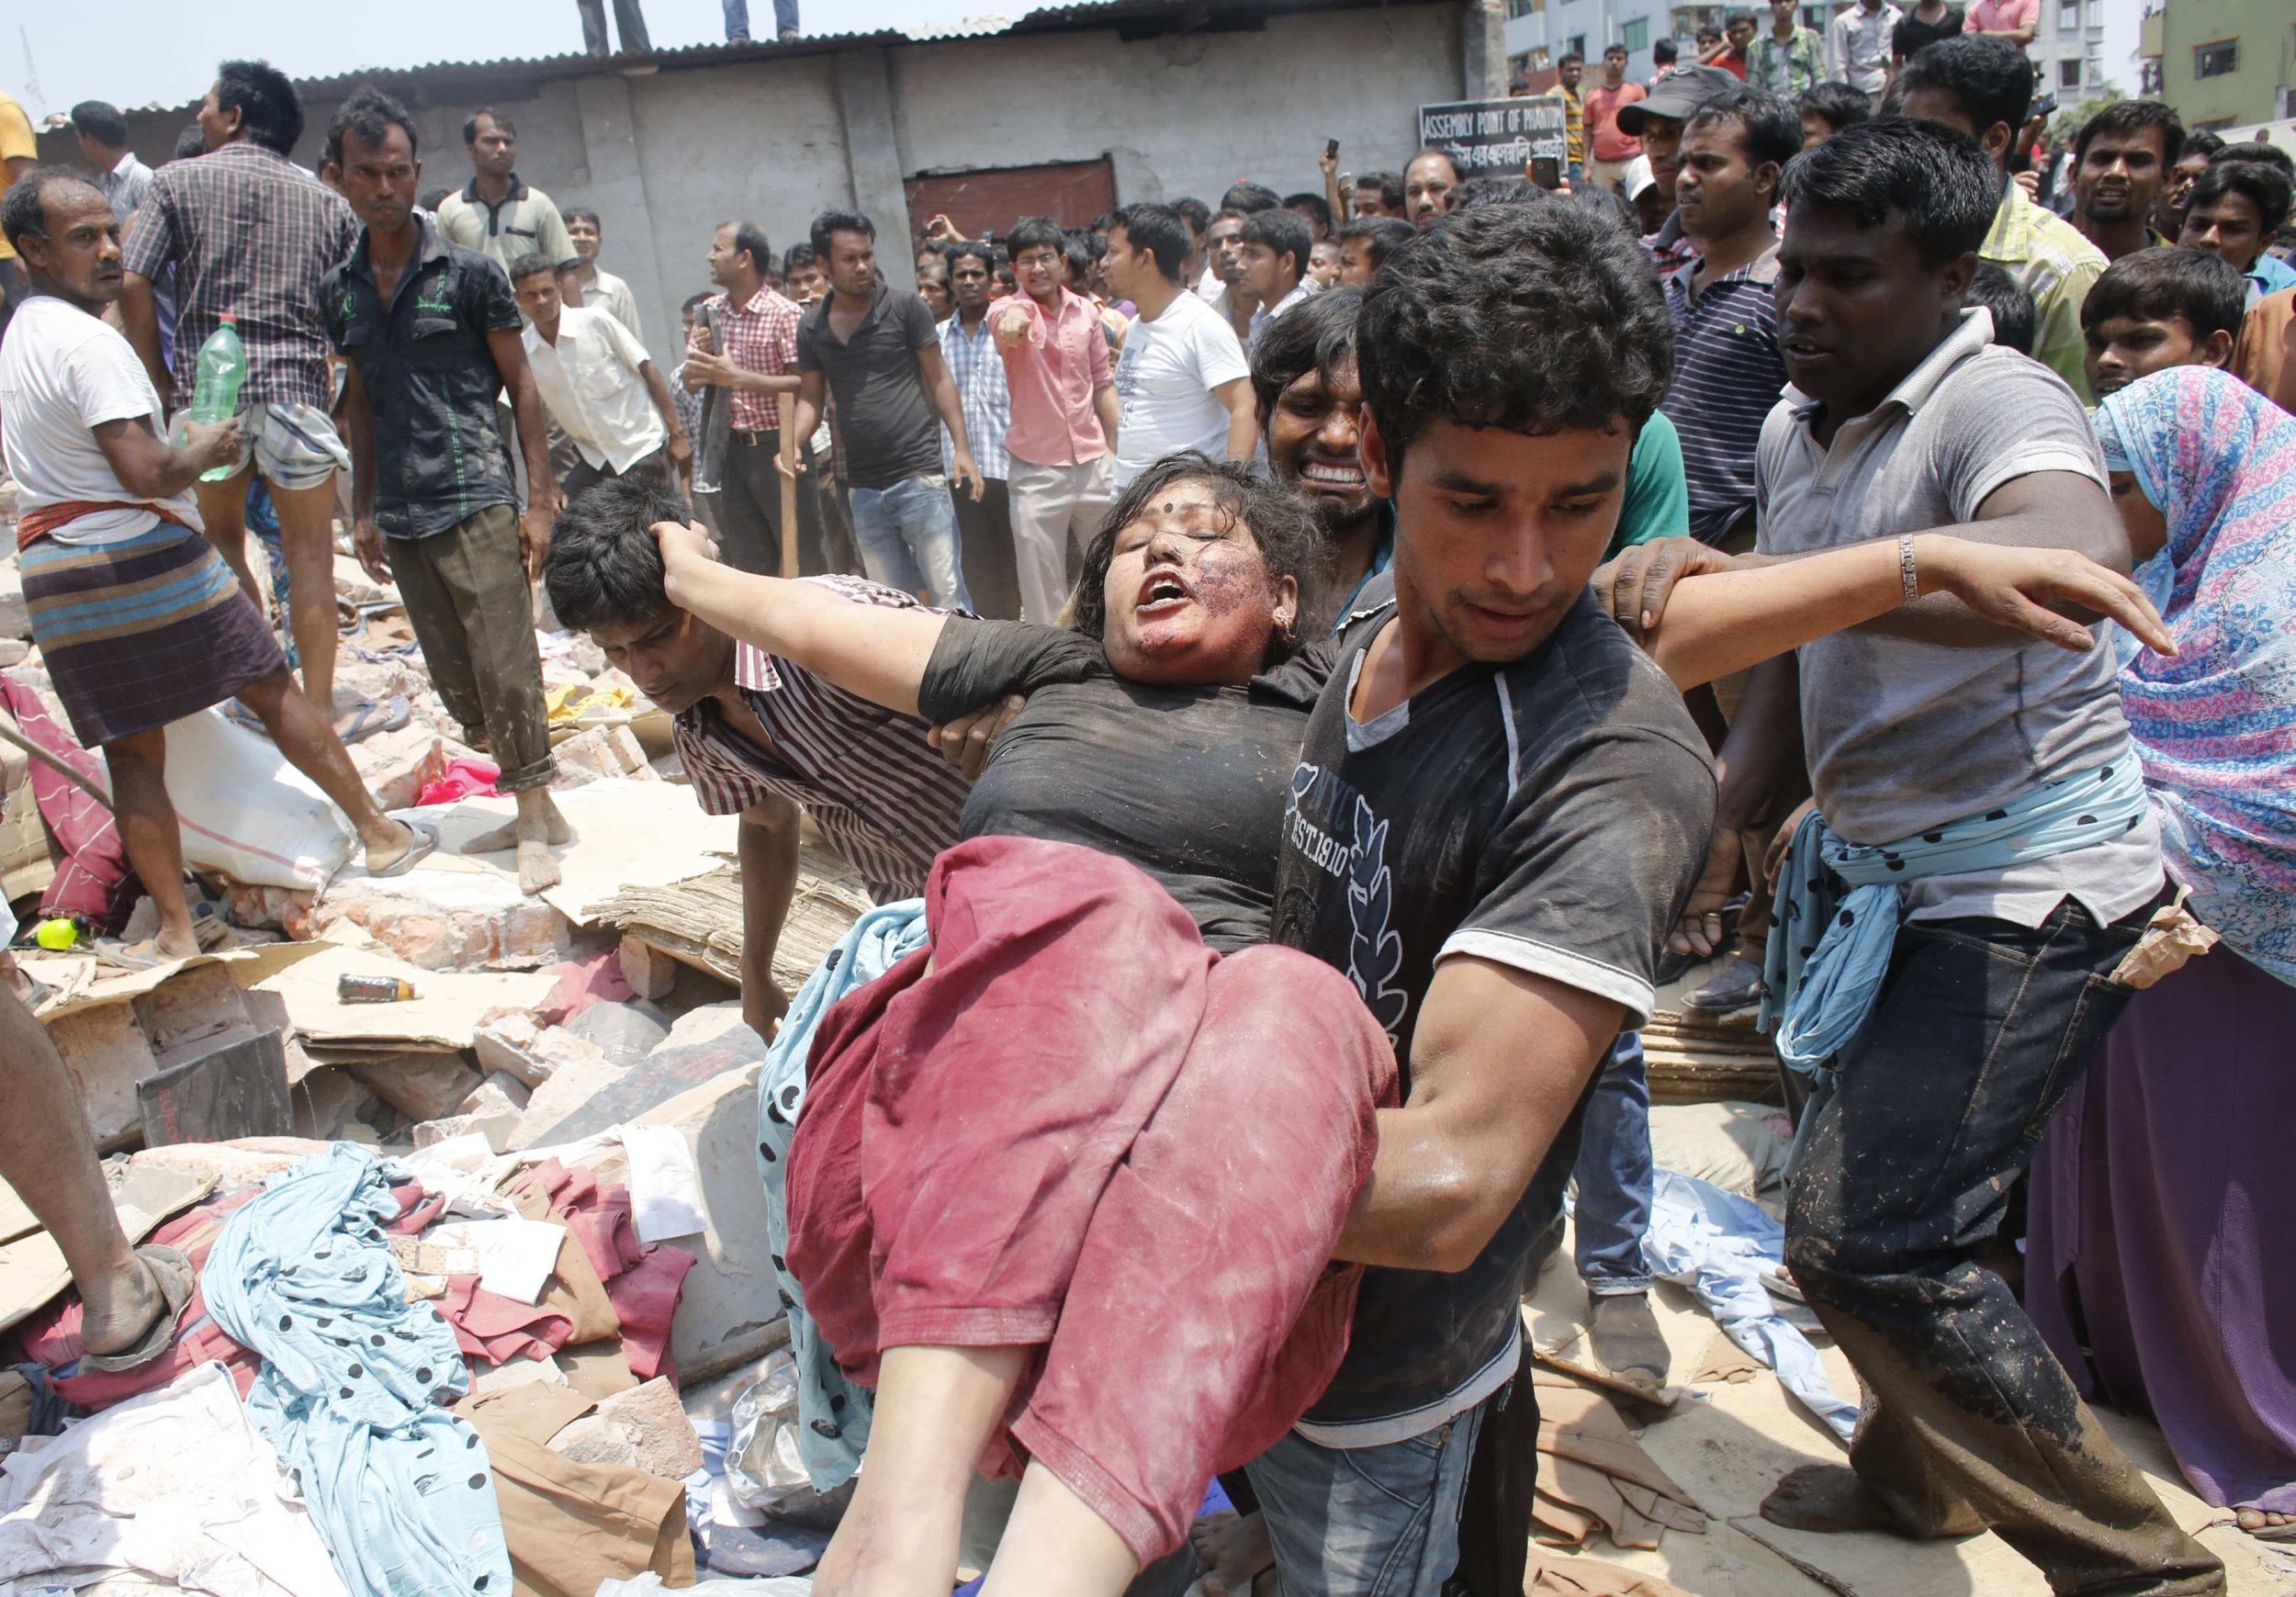 Building Collapse In Dhaka, Bangladesh Kills Over 80, Hundreds Injured, Dozens Feared Trapped In Debris